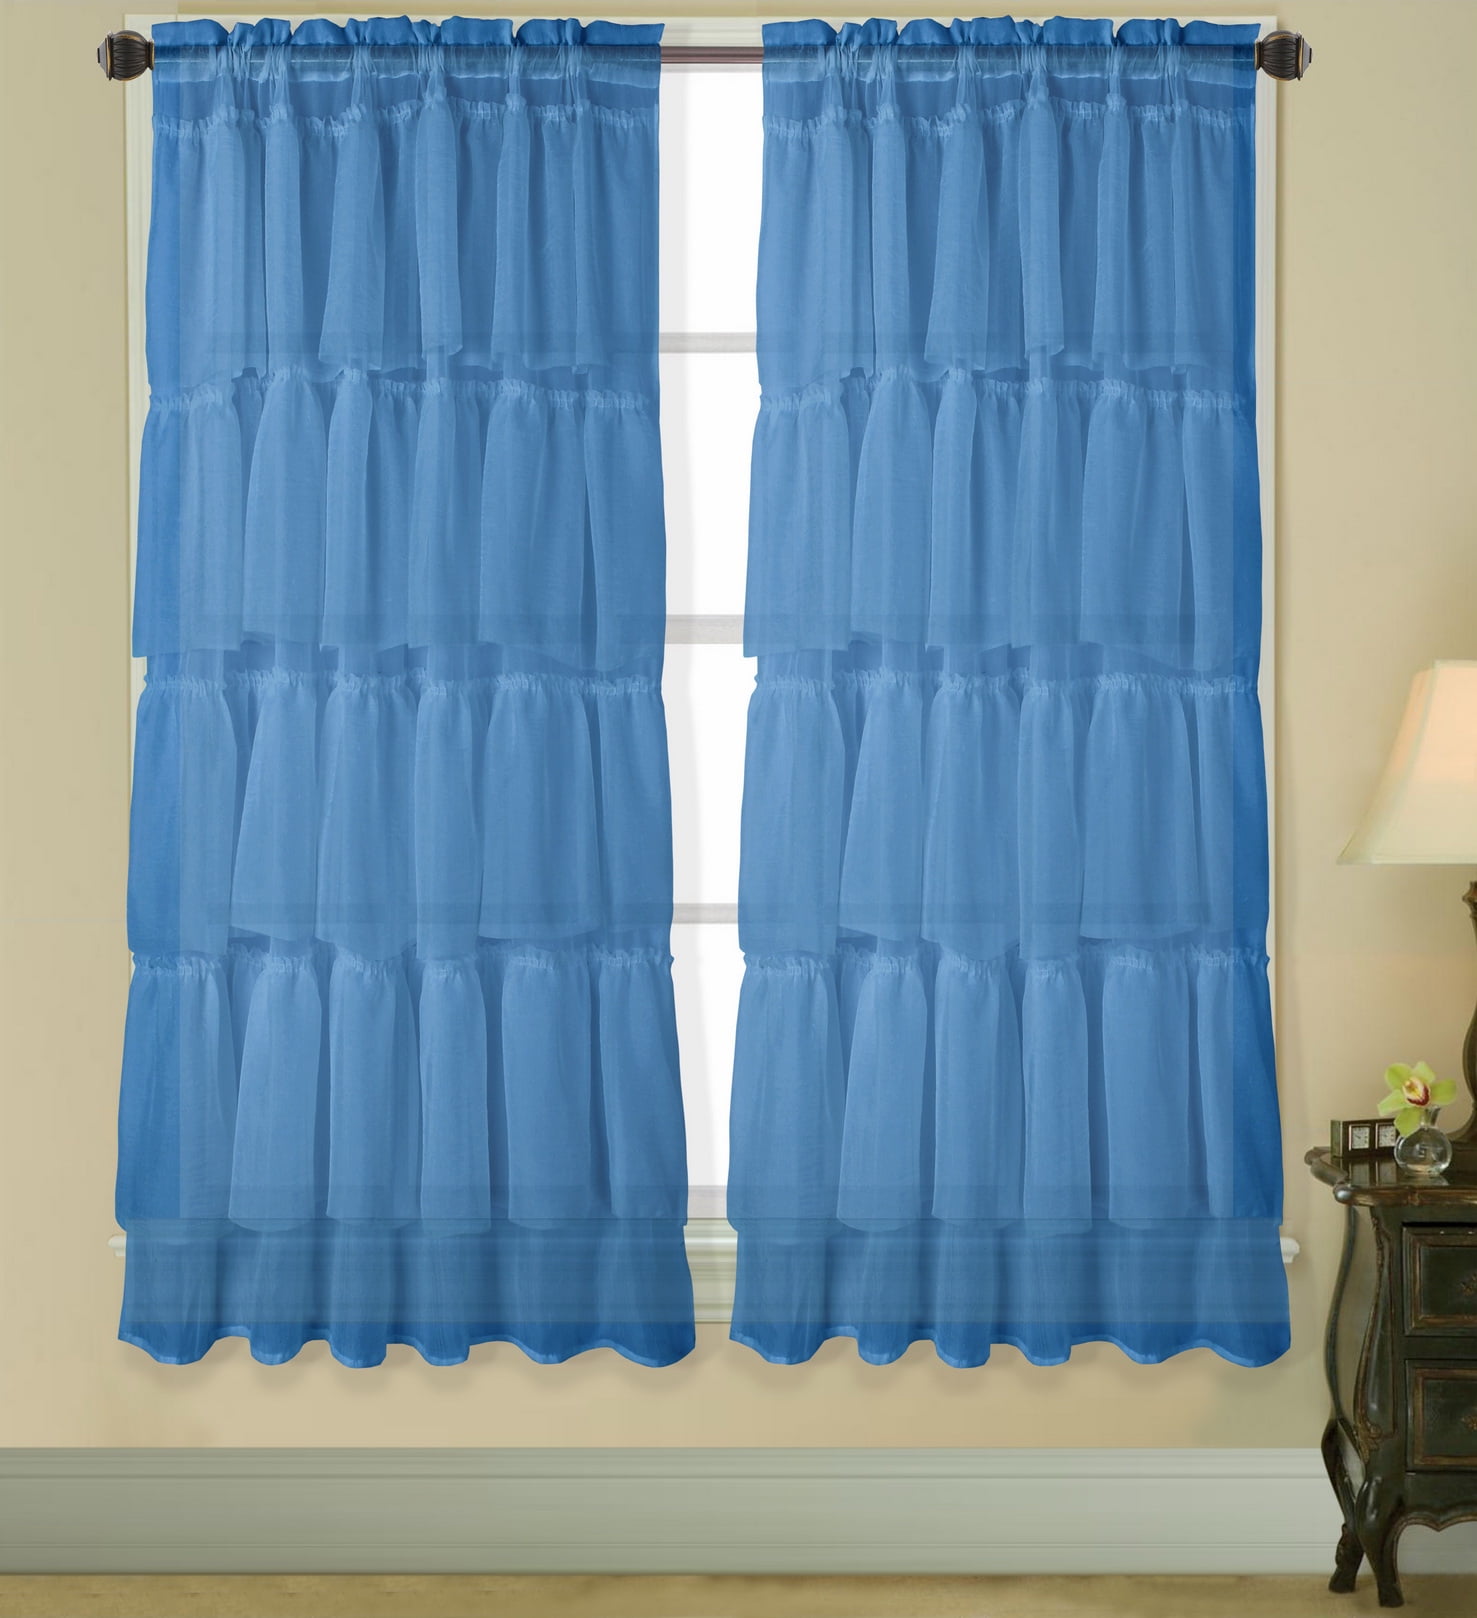 GYPSY SHEER VOILE CRUSHED RUFFLE WINDOW PANEL CURTAIN SHORT TREATMENT 1PC 55x63"